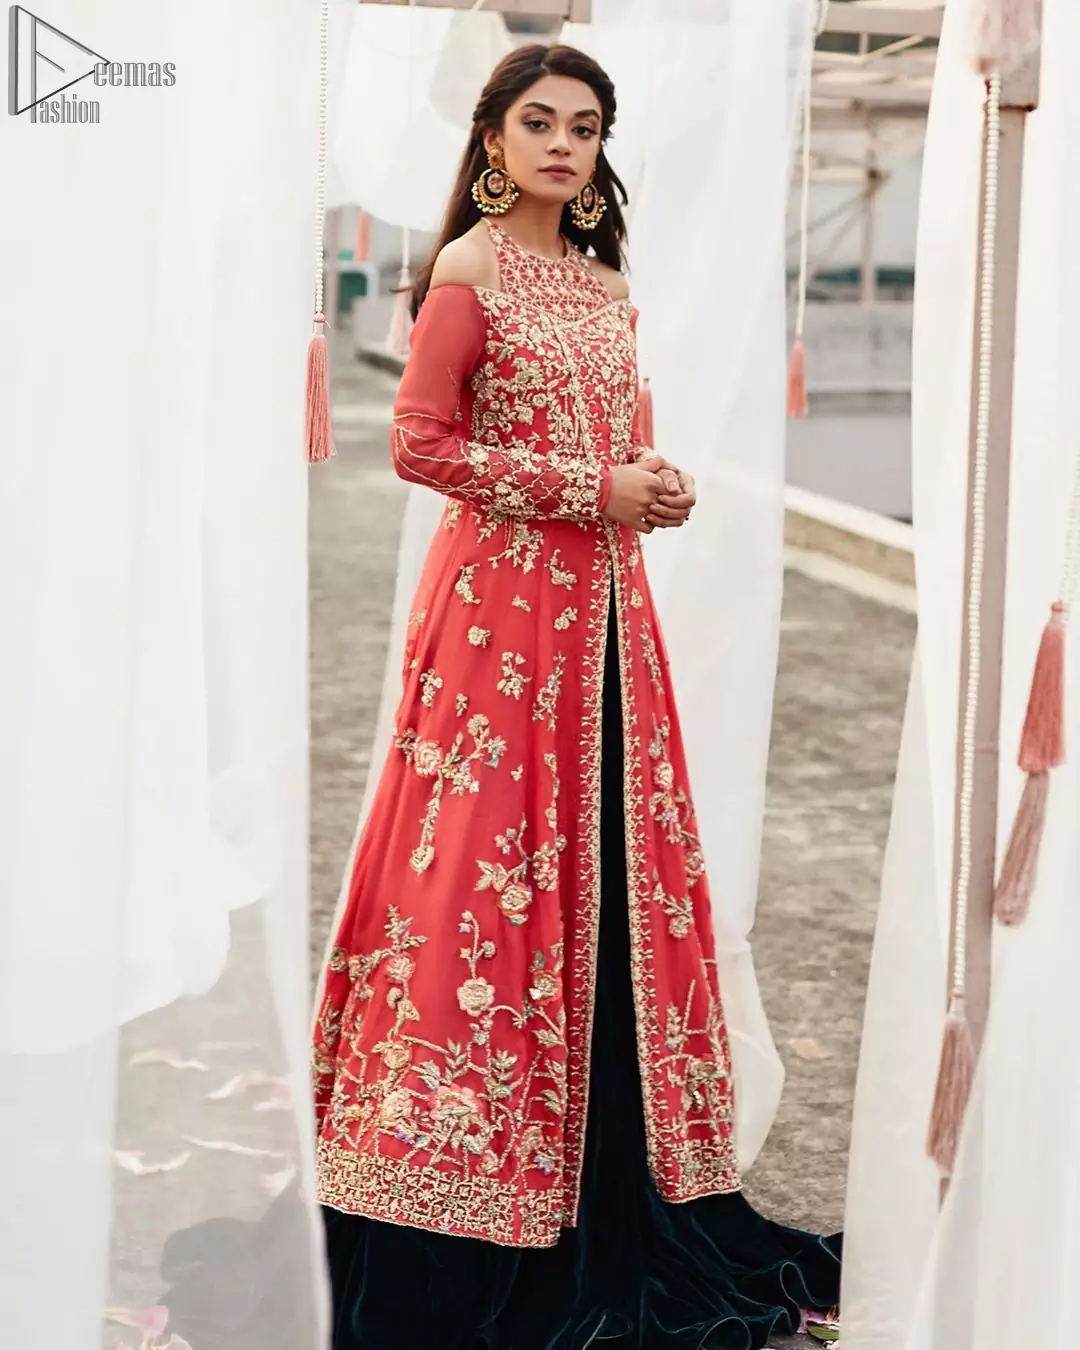 This outfit brings drama and playfulness to traditional frock and Sharara with a modern approach. Drape yourself to perfection for the classic affair in this flattering front open ensemble festooned with intricate zardozi hand embroidery work and motifs. The frock is furthermore adorned with halter neckline and comprises with overlaped bodice. Embellishment is done with zardozi embroidery in silver color. This outfit is comprises with bottle green velvet sharara and coral chiffon dupatta with sequins spray all over.